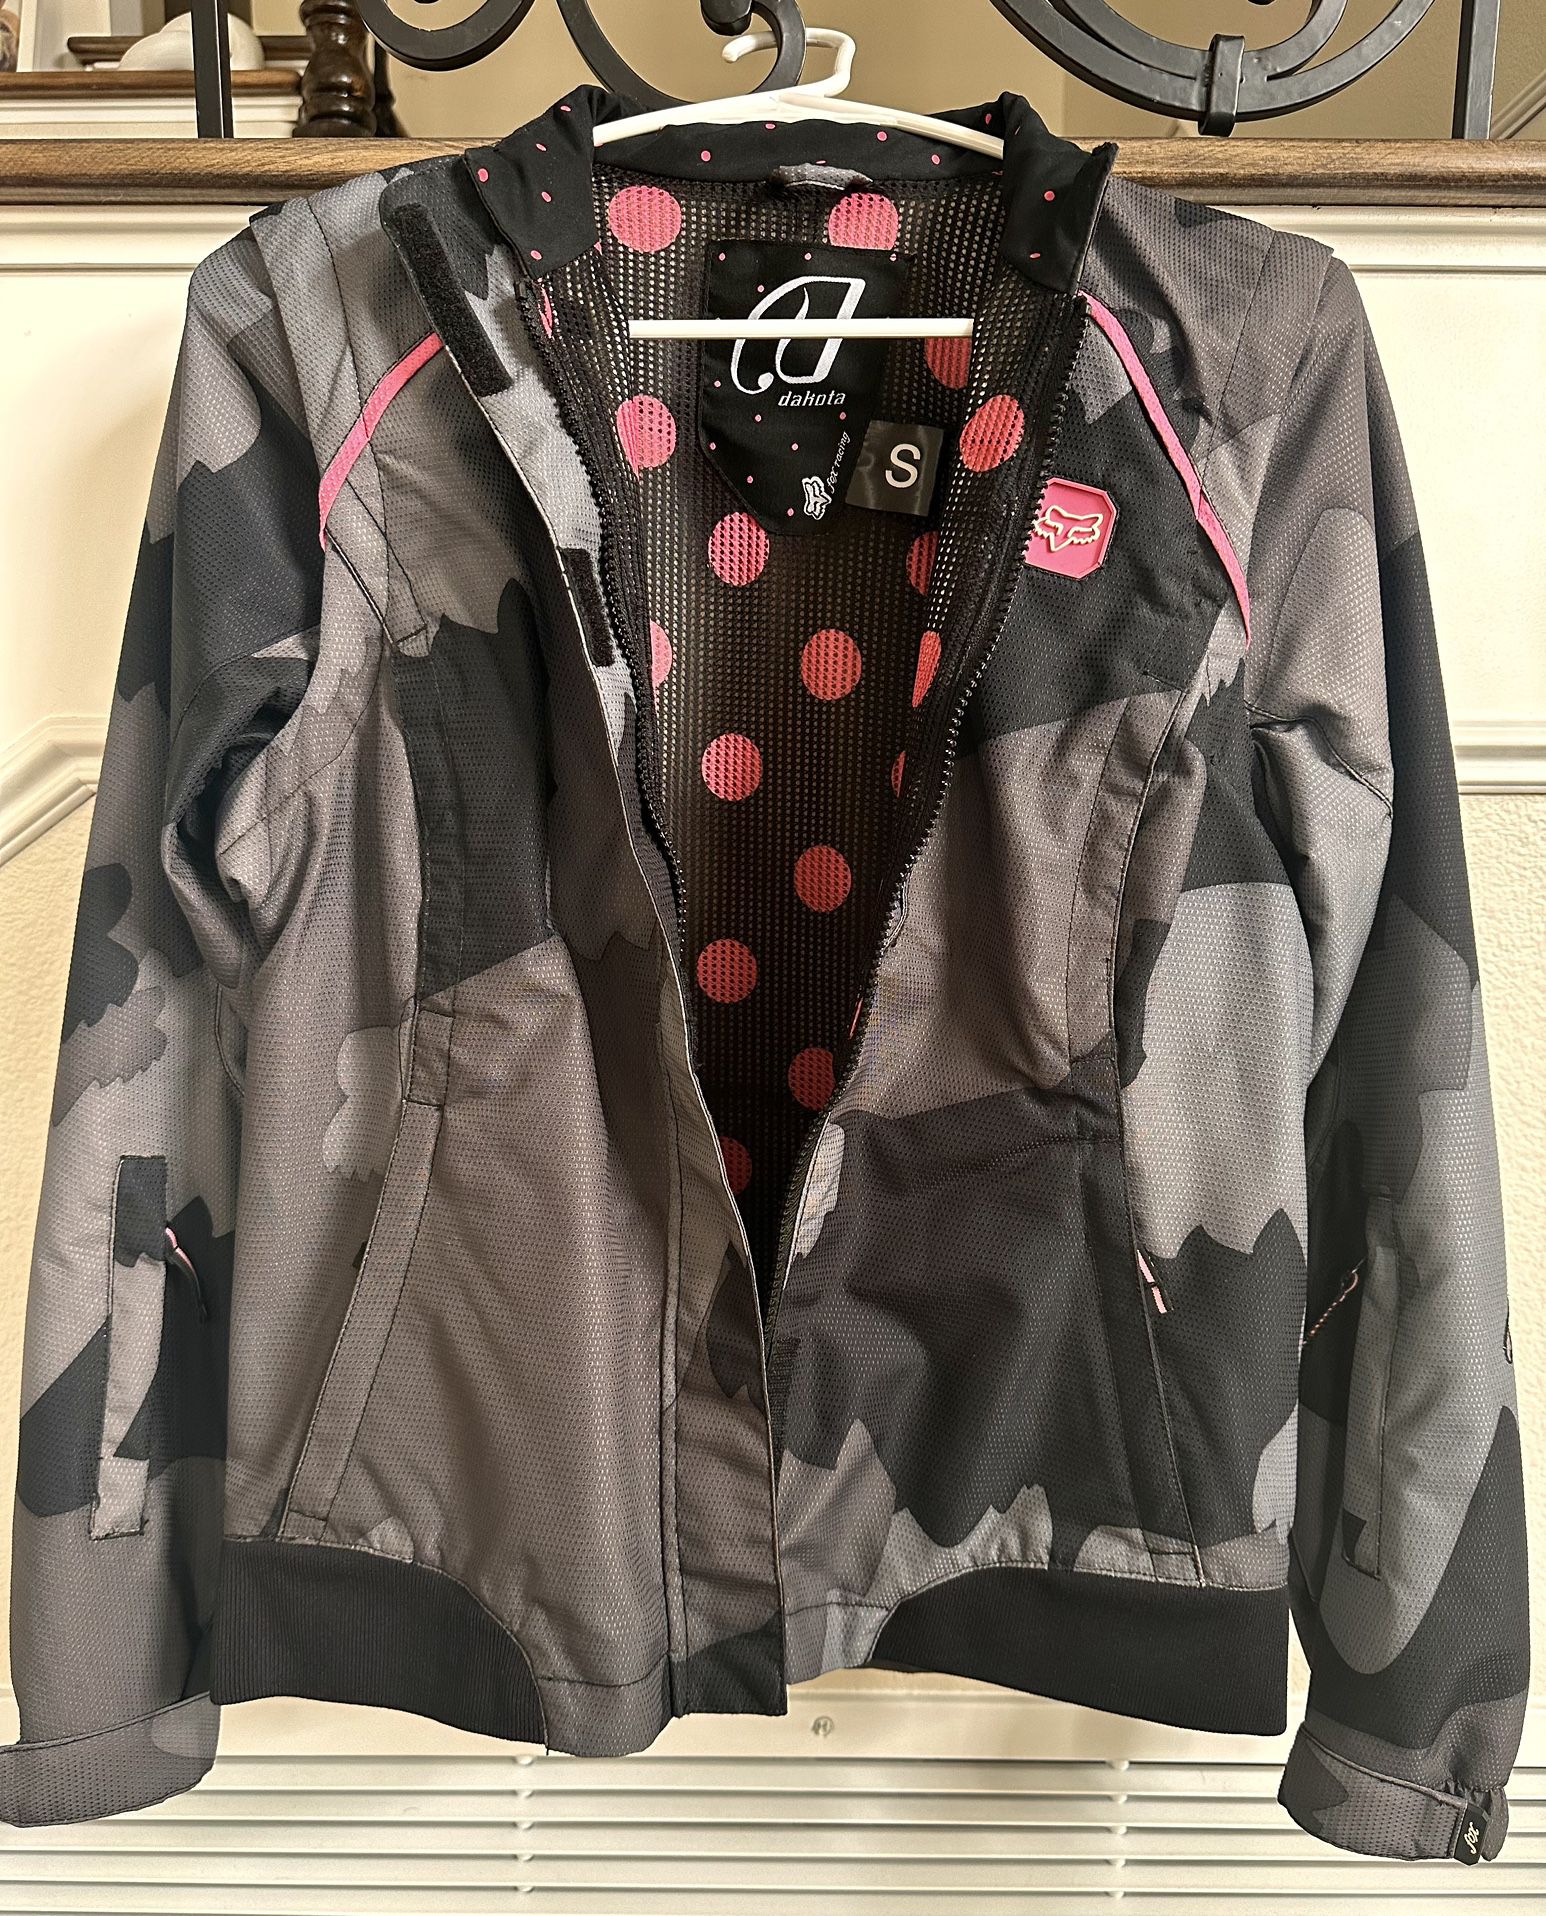 BRAND NEW - FOX RACING DAKOTA JACKET / VEST - BLACK/GRAY CAMOUFLAGE WITH PINK POLKA DOTS, PADDED ELBOWS, 8 VENTILATION ZIPPERS - WOMENS SMALL.  MINT C